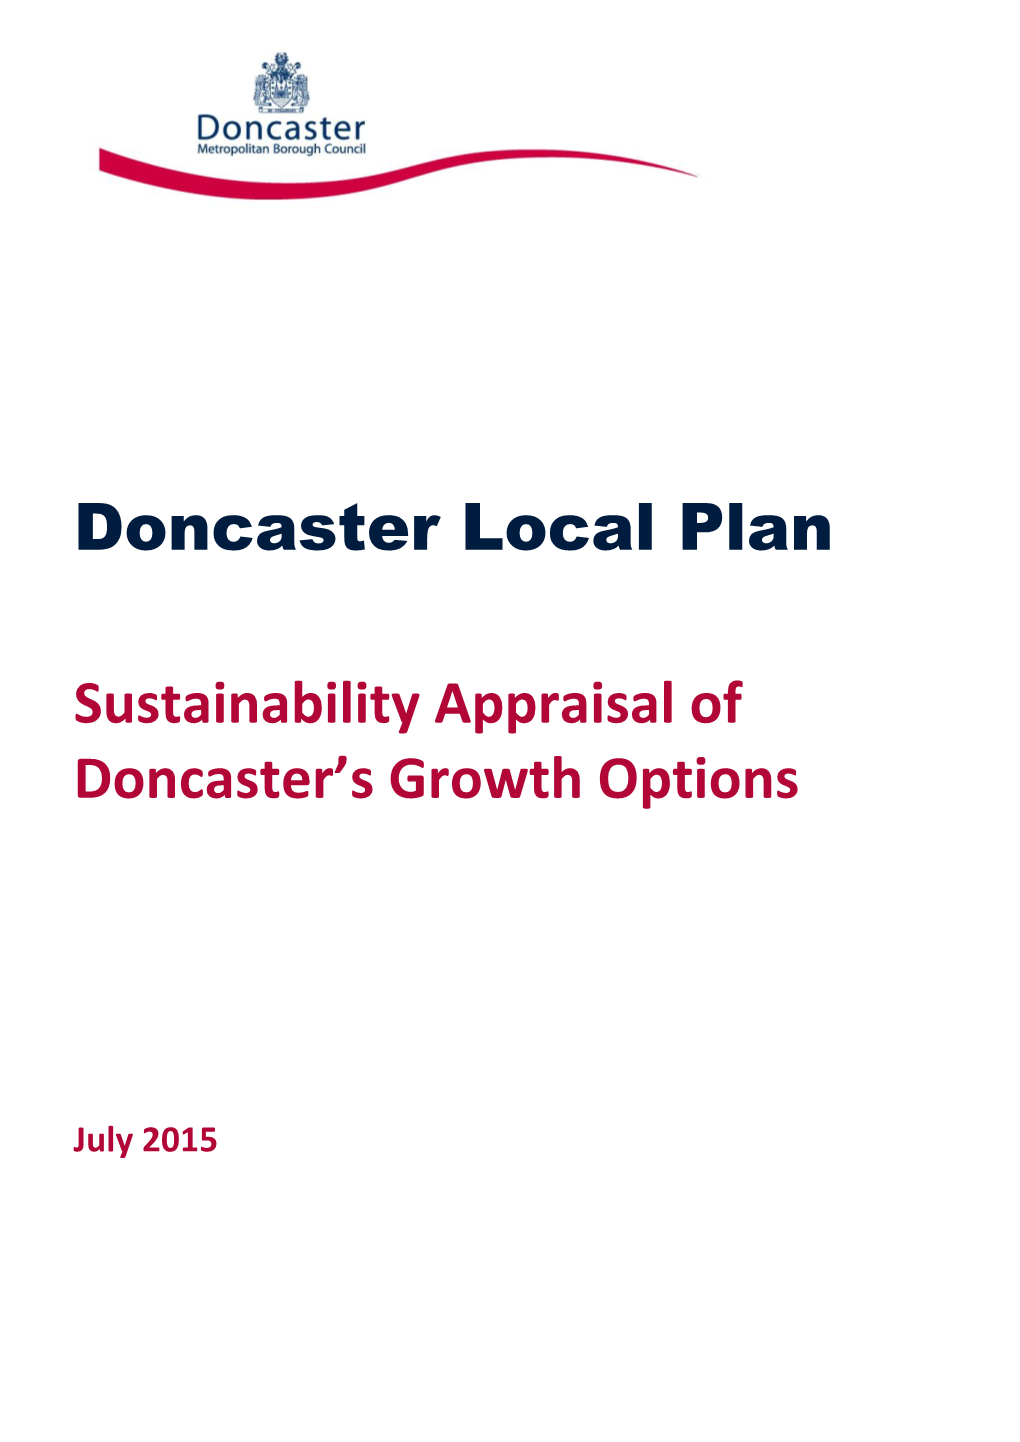 Sustainability Appraisal of Doncaster's Growth Options